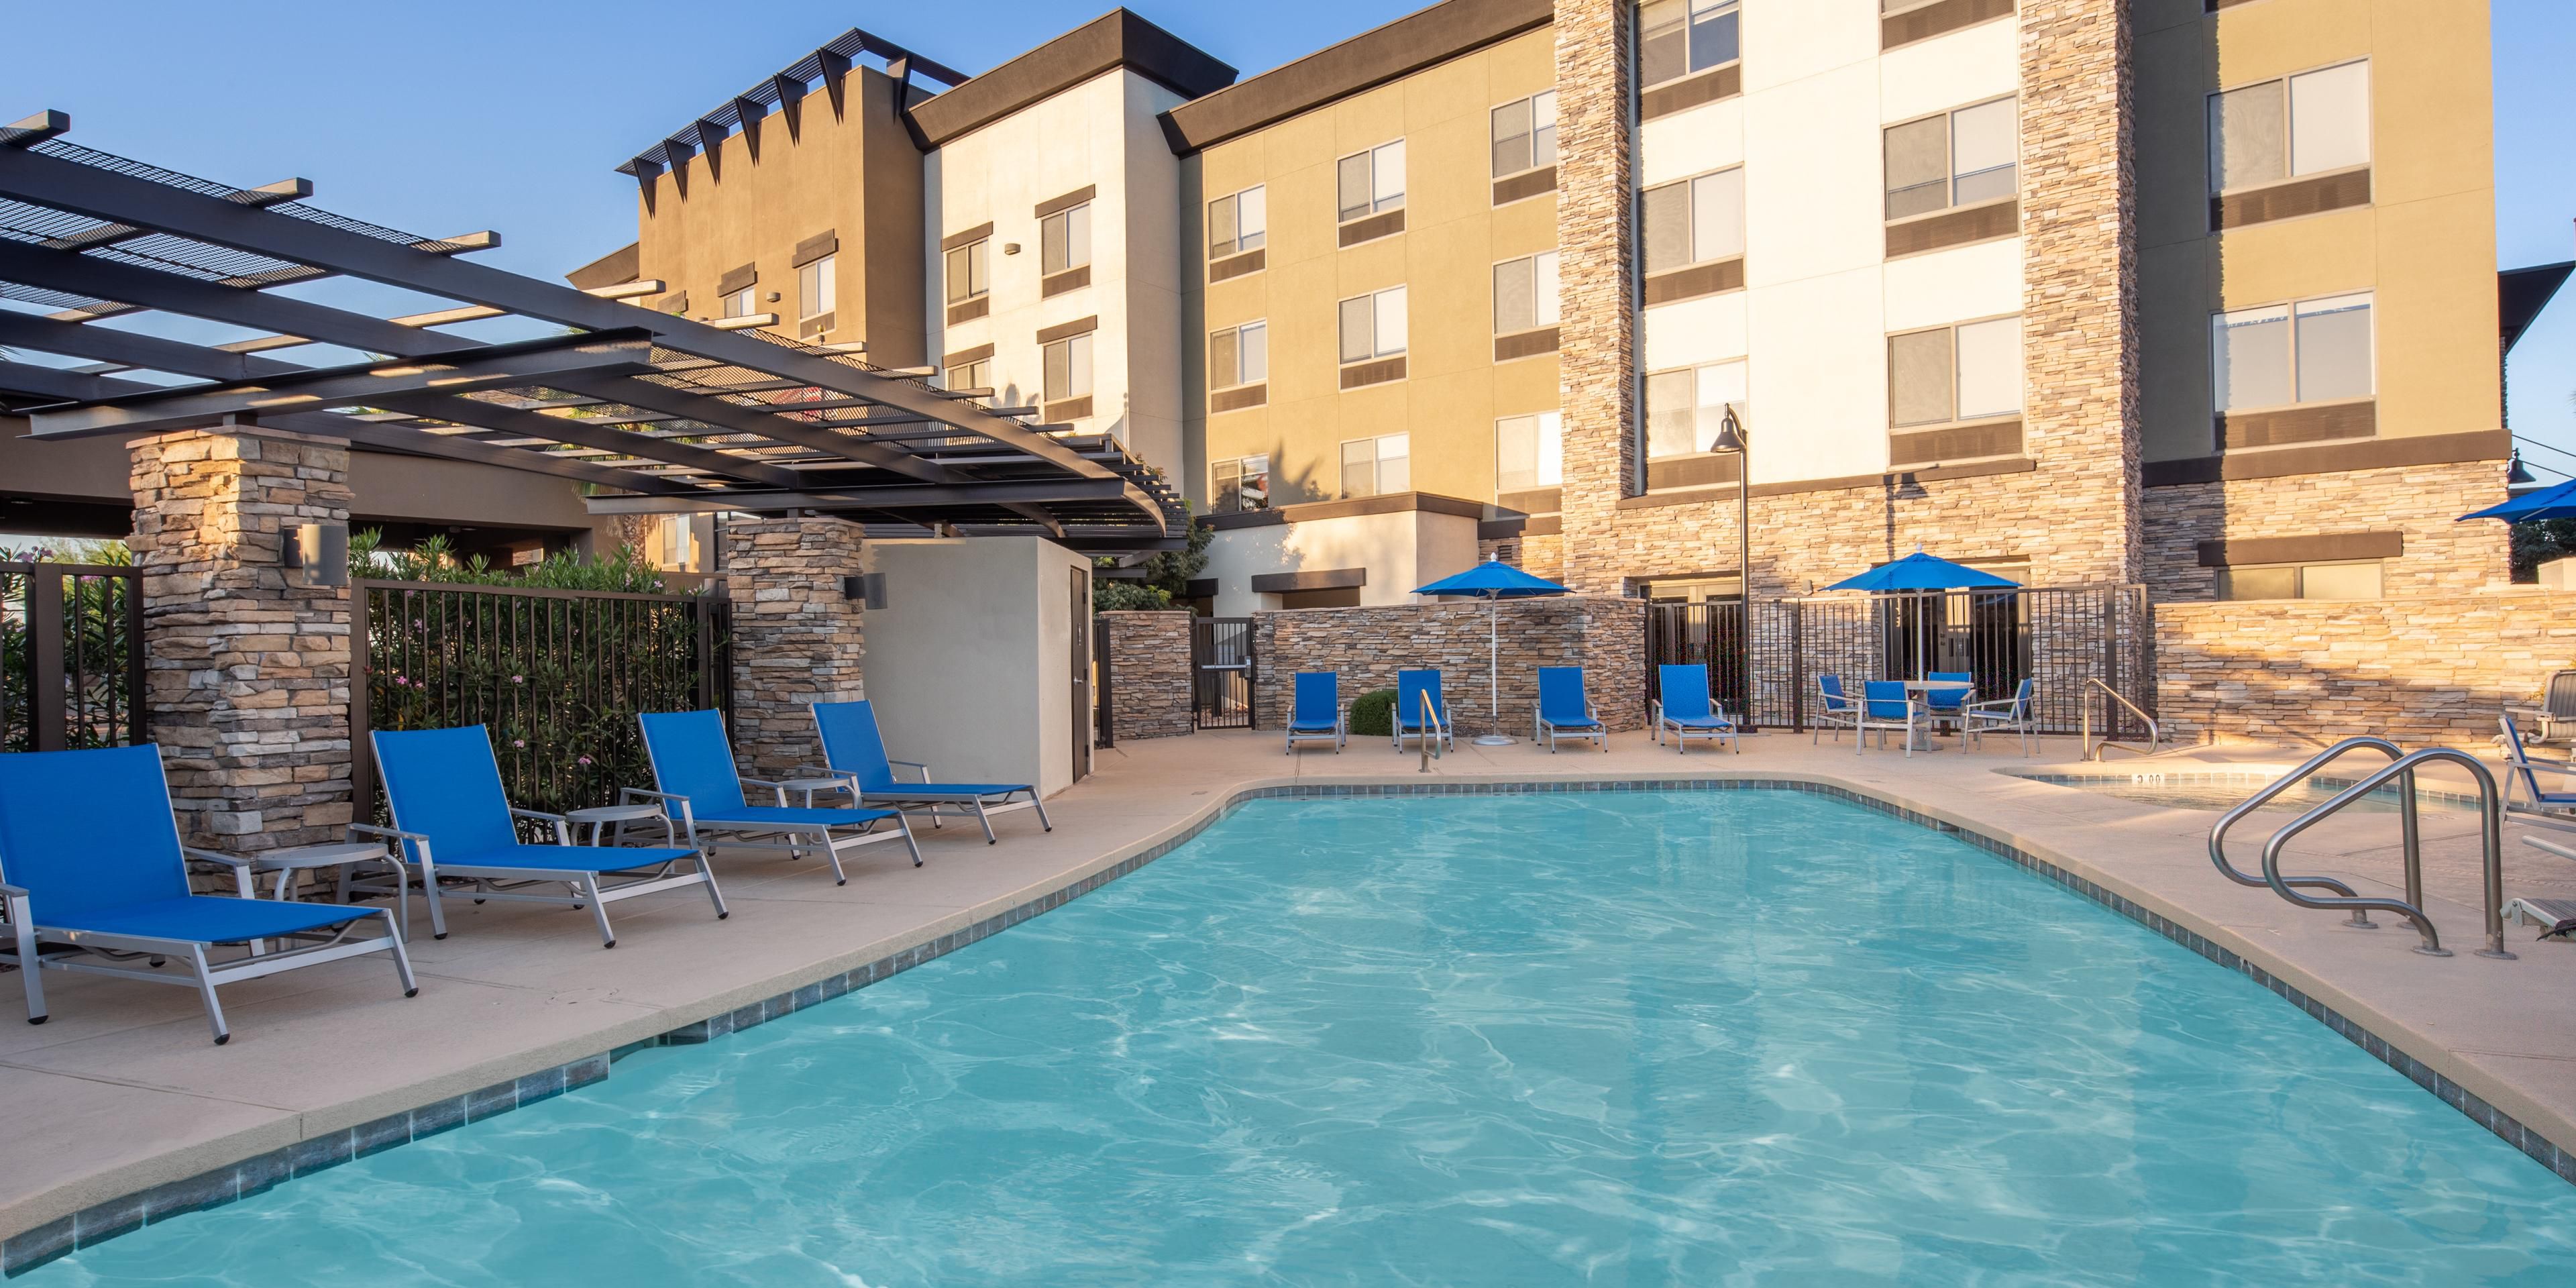 Discount [60% Off] Holiday Inn Express Surprise United States - Hotel Near Me | Best Hotel ...